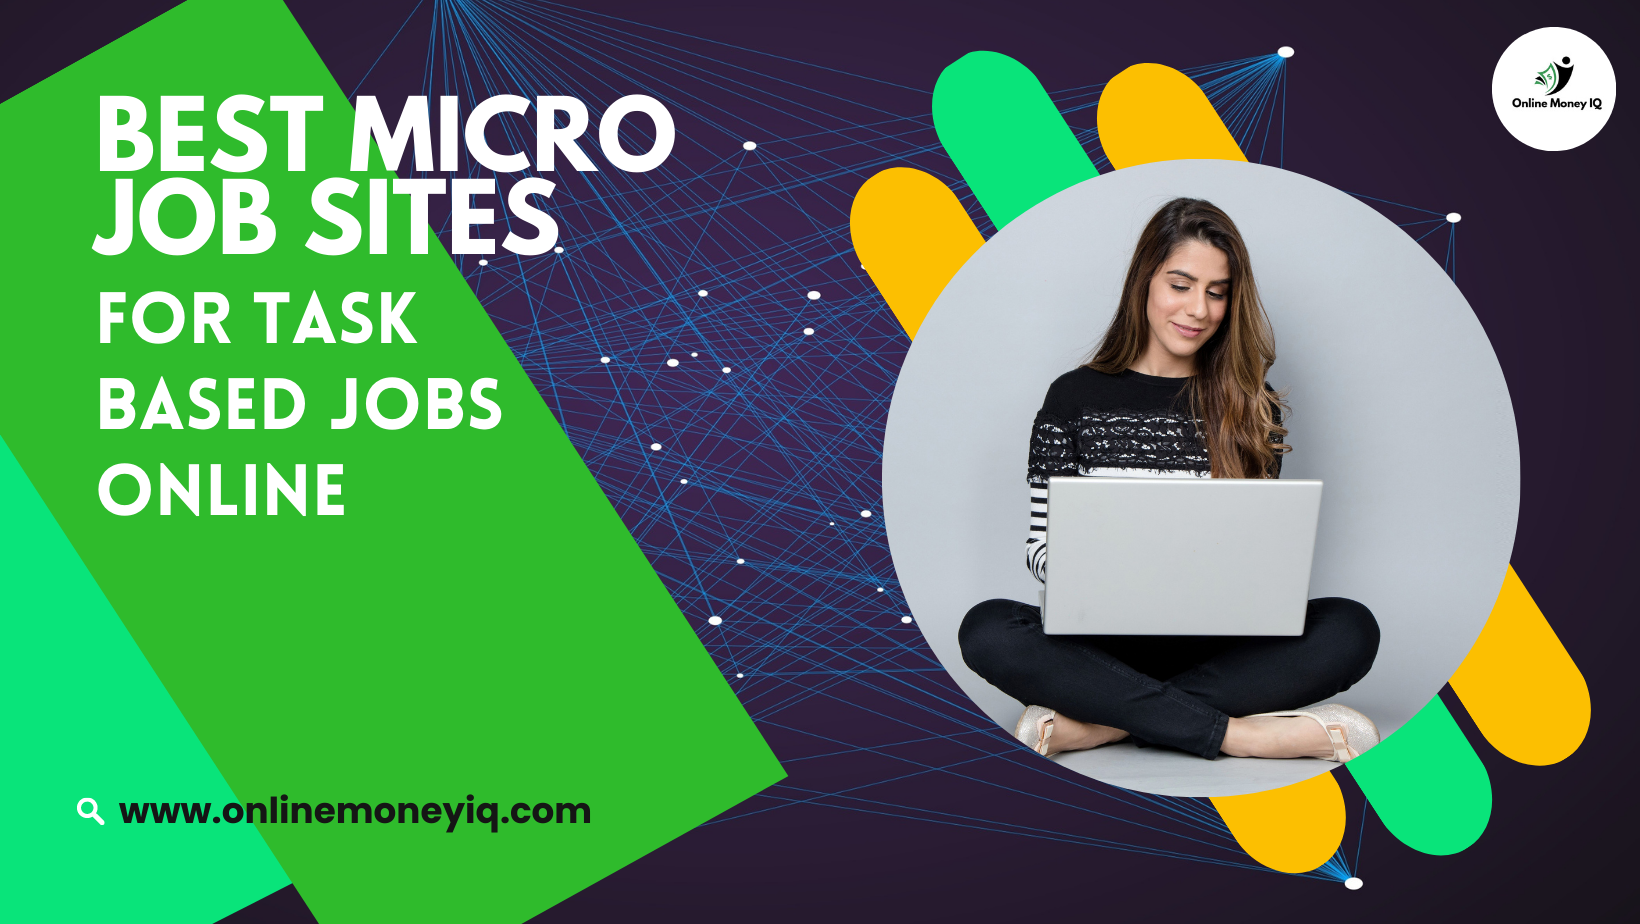 You are currently viewing Best Micro Job Sites For Task Based Jobs Online.